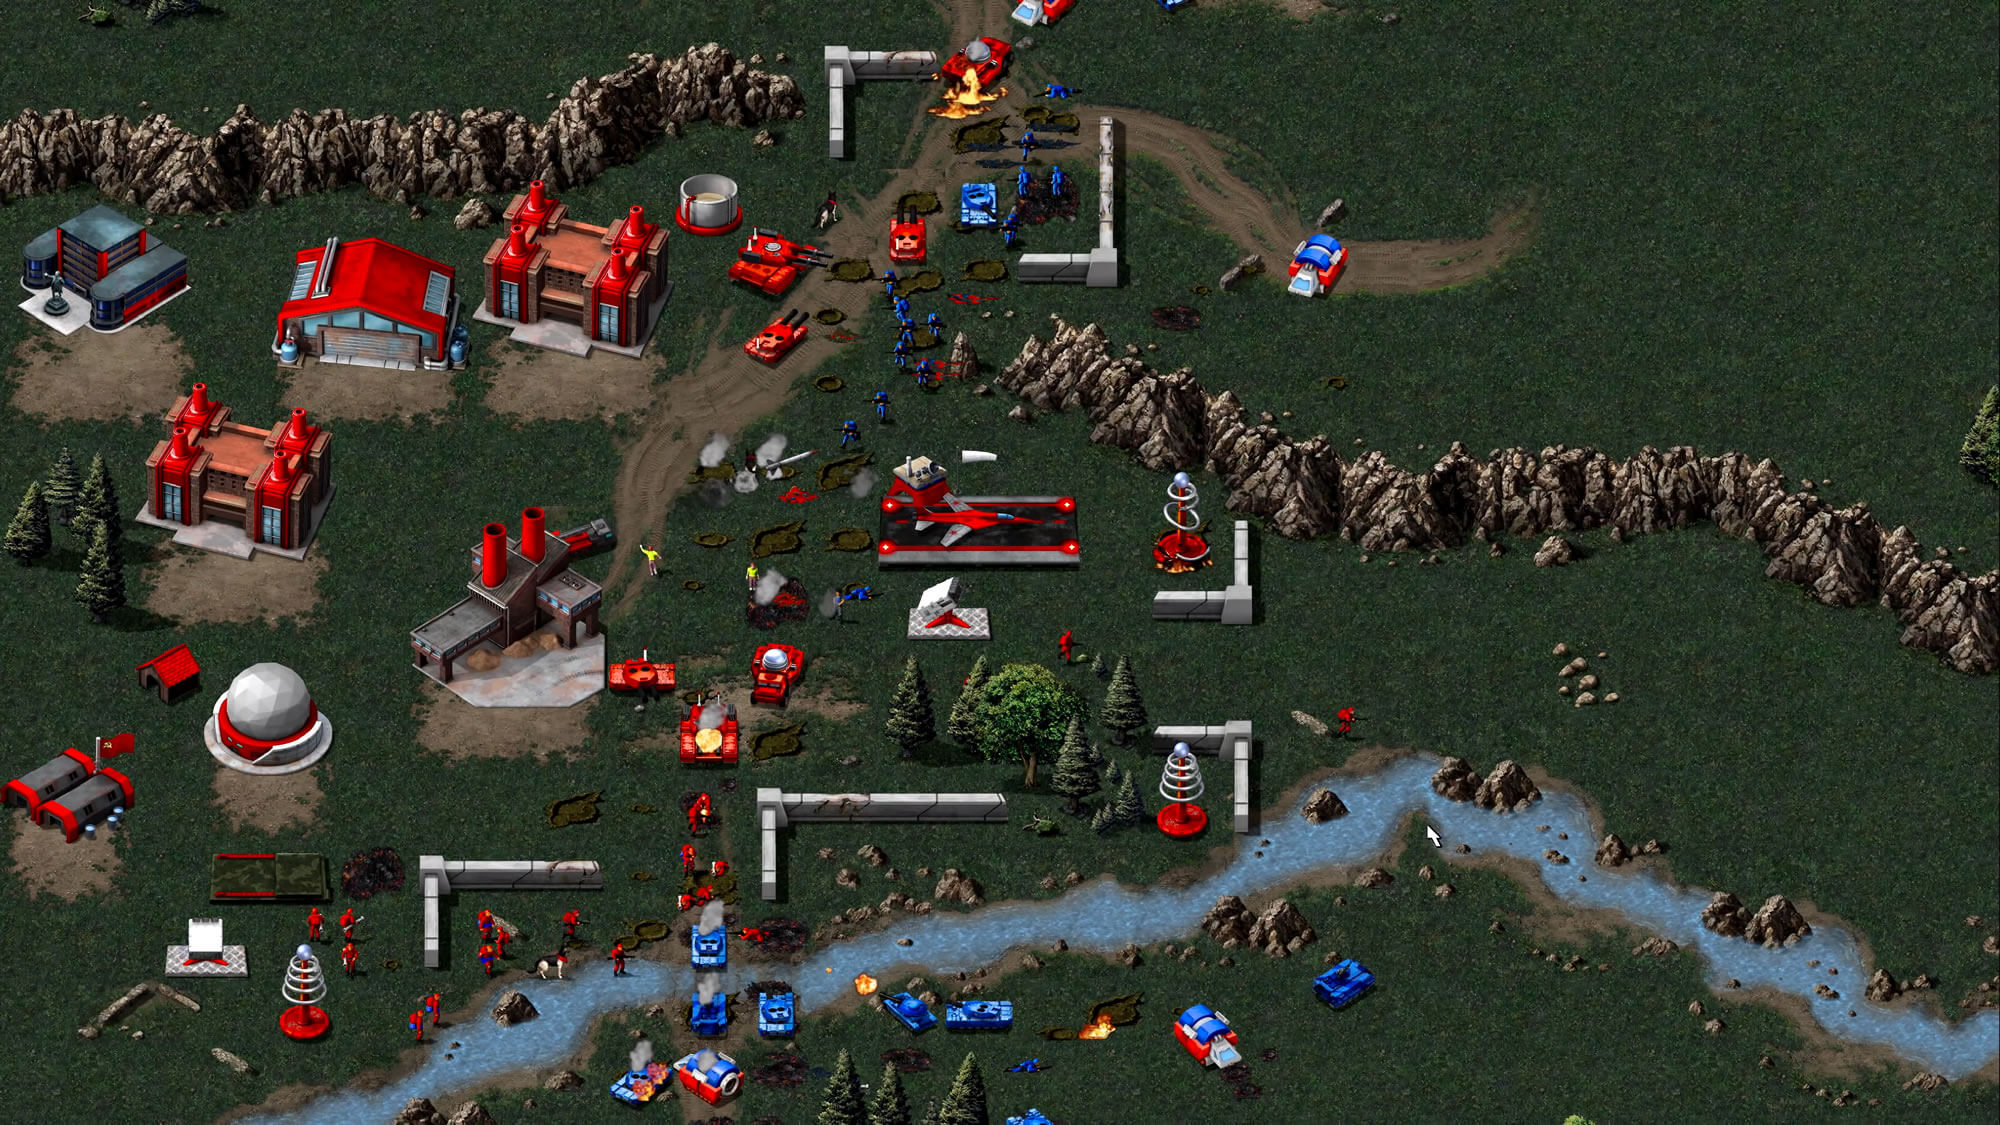 Command and conquer remastered. Command Conquer Remastered collection 2020. Command & Conquer Remastered collection. Red Alert 2 ремастер. Ред Алерт 1 ремастер.